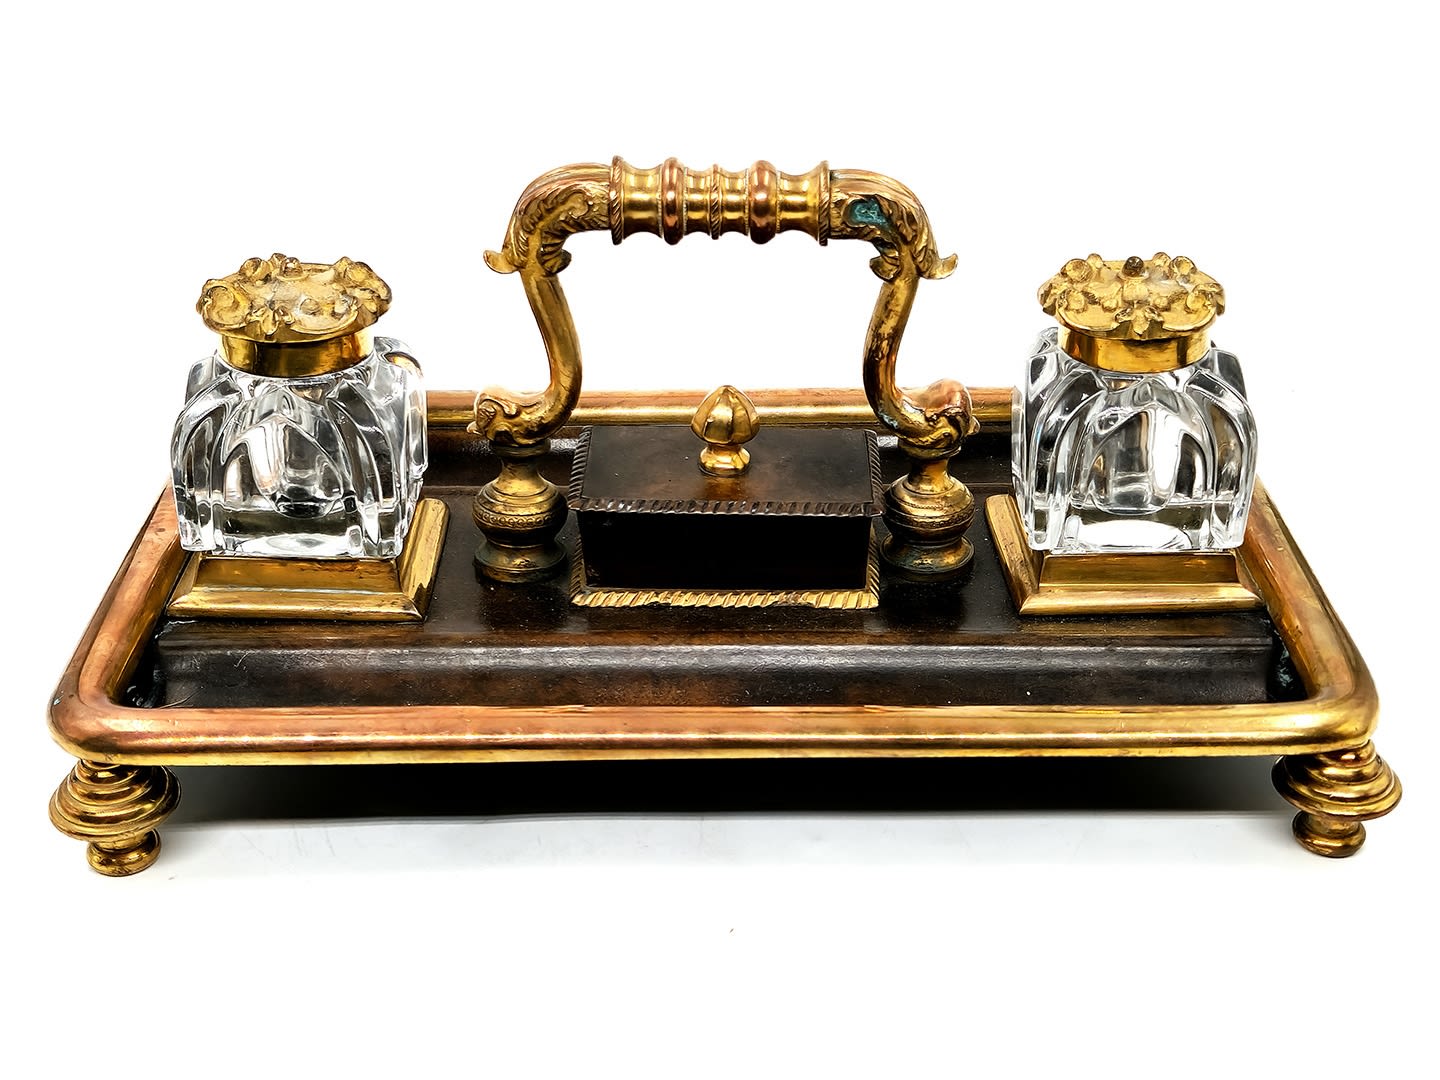 An antique double tabletop inkwell, brass and spelter, the ink wells themselves are made of glass, - Image 4 of 7